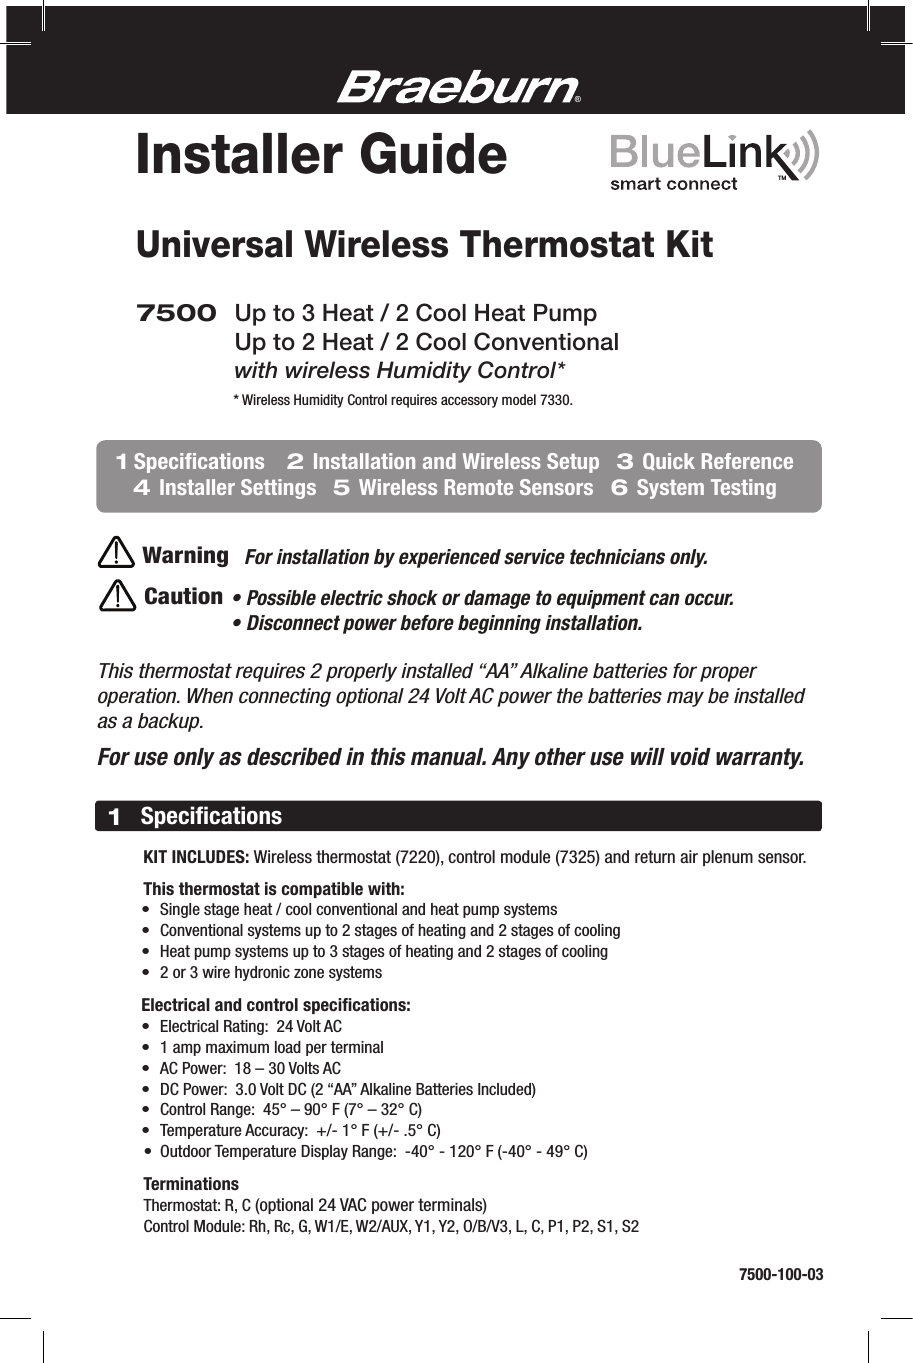 Universal Wireless Thermostat Kit• Possible electric shock or damage to equipment can occur.• Disconnect power before beginning installation.CautionThis thermostat requires 2 properly installed “AA” Alkaline batteries for proper operation. When connecting optional 24 Volt AC power the batteries may be installed as a backup.For use only as described in this manual. Any other use will void warranty.7500 Up to 3 Heat / 2 Cool Heat Pump  Up to 2 Heat / 2 Cool Conventional with wireless Humidity Control*WarningFor installation by experienced service technicians only.®      KIT INCLUDES: Wireless thermostat (7220), control module (7325) and return air plenum sensor.    This thermostat is compatible with:  • Singlestageheat/coolconventionalandheatpumpsystems  • Conventionalsystemsupto2stagesofheatingand2stagesofcooling  • Heatpumpsystemsupto3stagesofheatingand2stagesofcooling  • 2or3wirehydroniczonesystems   Electrical and control speciﬁcations:  • ElectricalRating:24VoltAC  • 1ampmaximumloadperterminal  • ACPower:18–30VoltsAC  • DCPower:3.0VoltDC(2“AA”AlkalineBatteriesIncluded)  • ControlRange:45°–90°F(7°–32°C)  • TemperatureAccuracy:+/-1°F(+/-.5°C)  • OutdoorTemperatureDisplayRange:-40°-120°F(-40°-49°C)   Terminations  Thermostat:R,C(optional24VACpowerterminals)  ControlModule:Rh,Rc,G,W1/E,W2/AUX,Y1,Y2,O/B/V3,L,C,P1,P2,S1,S21Speciﬁcations7500-100-03Installer Guide*WirelessHumidityControlrequiresaccessorymodel7330.1 Speciﬁcations    2 Installation and Wireless Setup   3 Quick Reference    4 Installer Settings   5 Wireless Remote Sensors   6 System TestingTM  